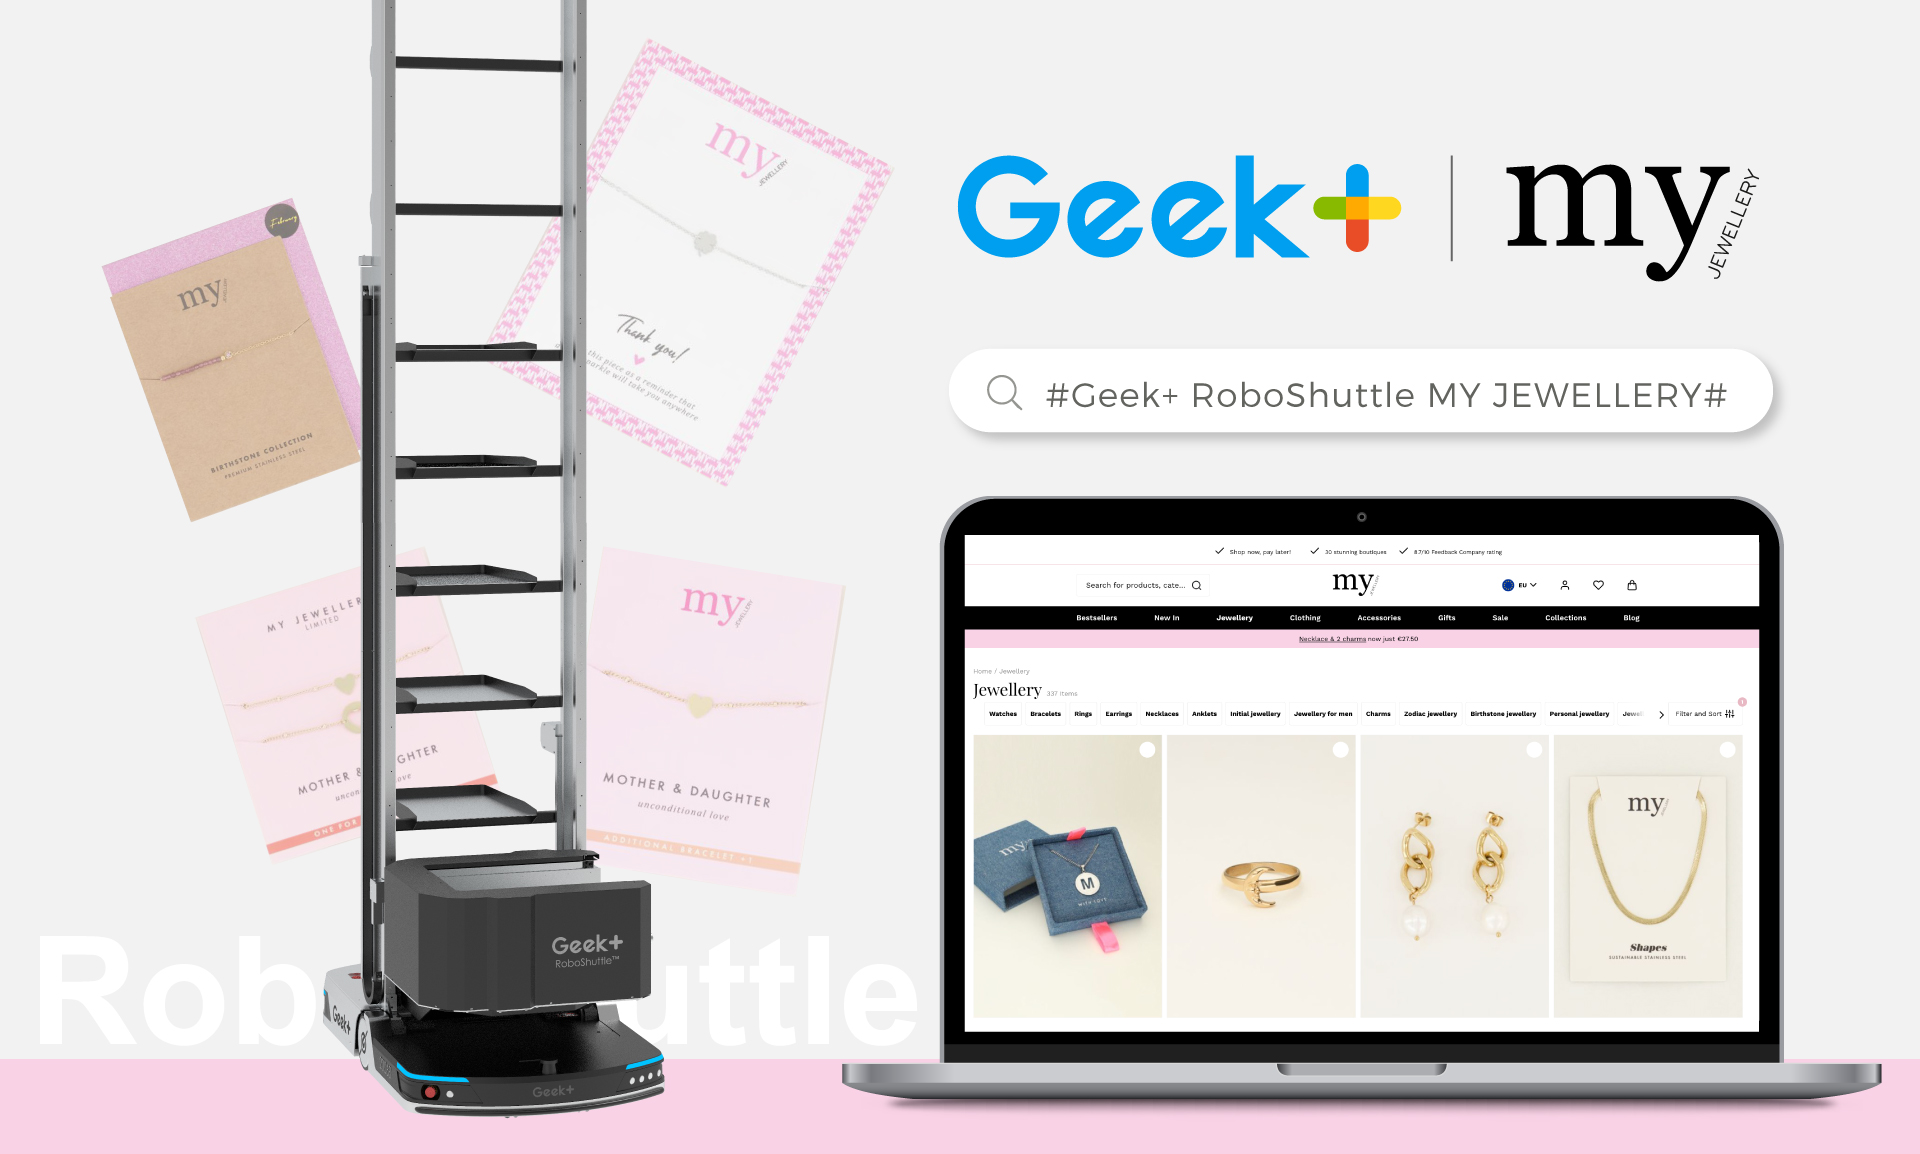 My Jewellery warehouse automation with RoboShuttle solution by Geek+